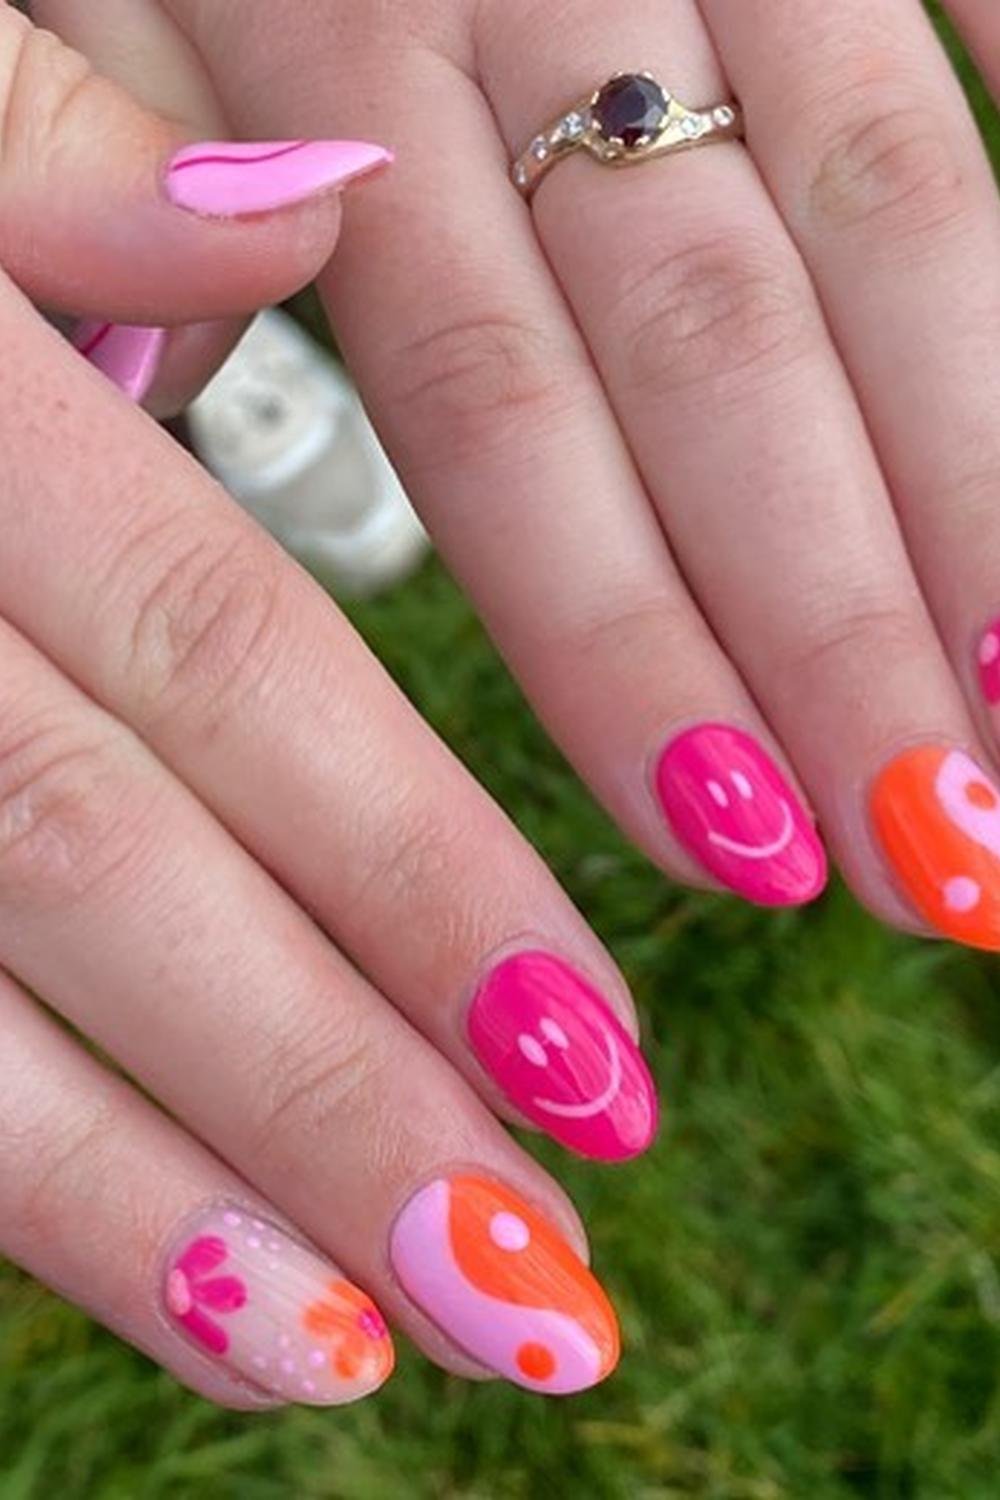 35 - Picture of Pink and Orange Nails